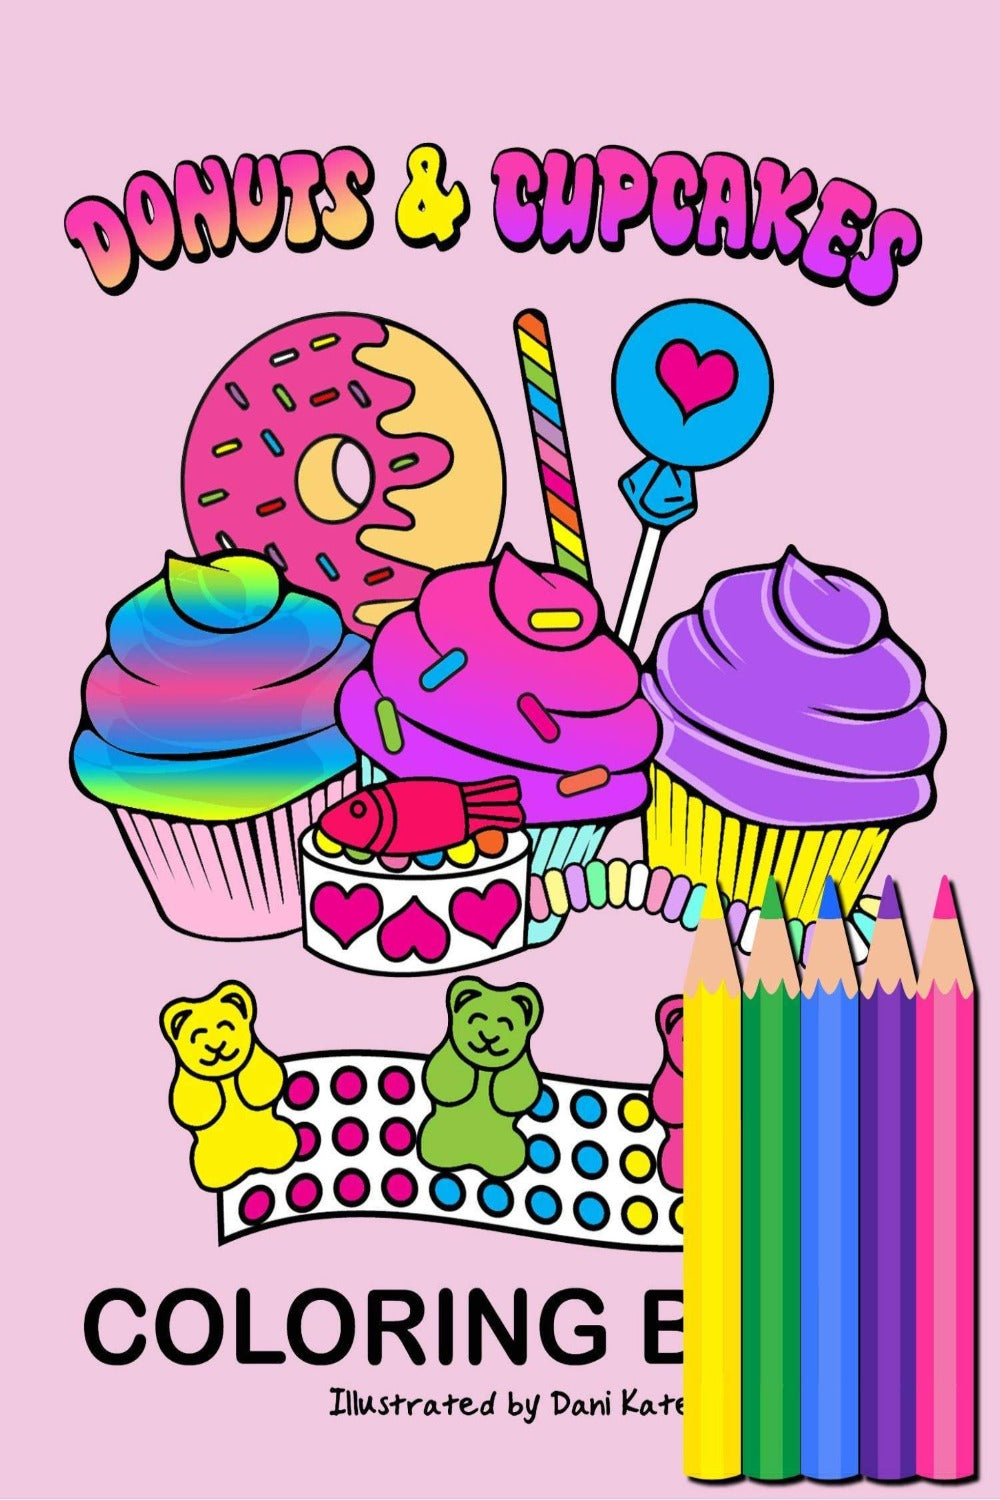 Donuts and Cupcakes Mini Coloring Book - a fun an colorful coloring book including 5 colored pencils